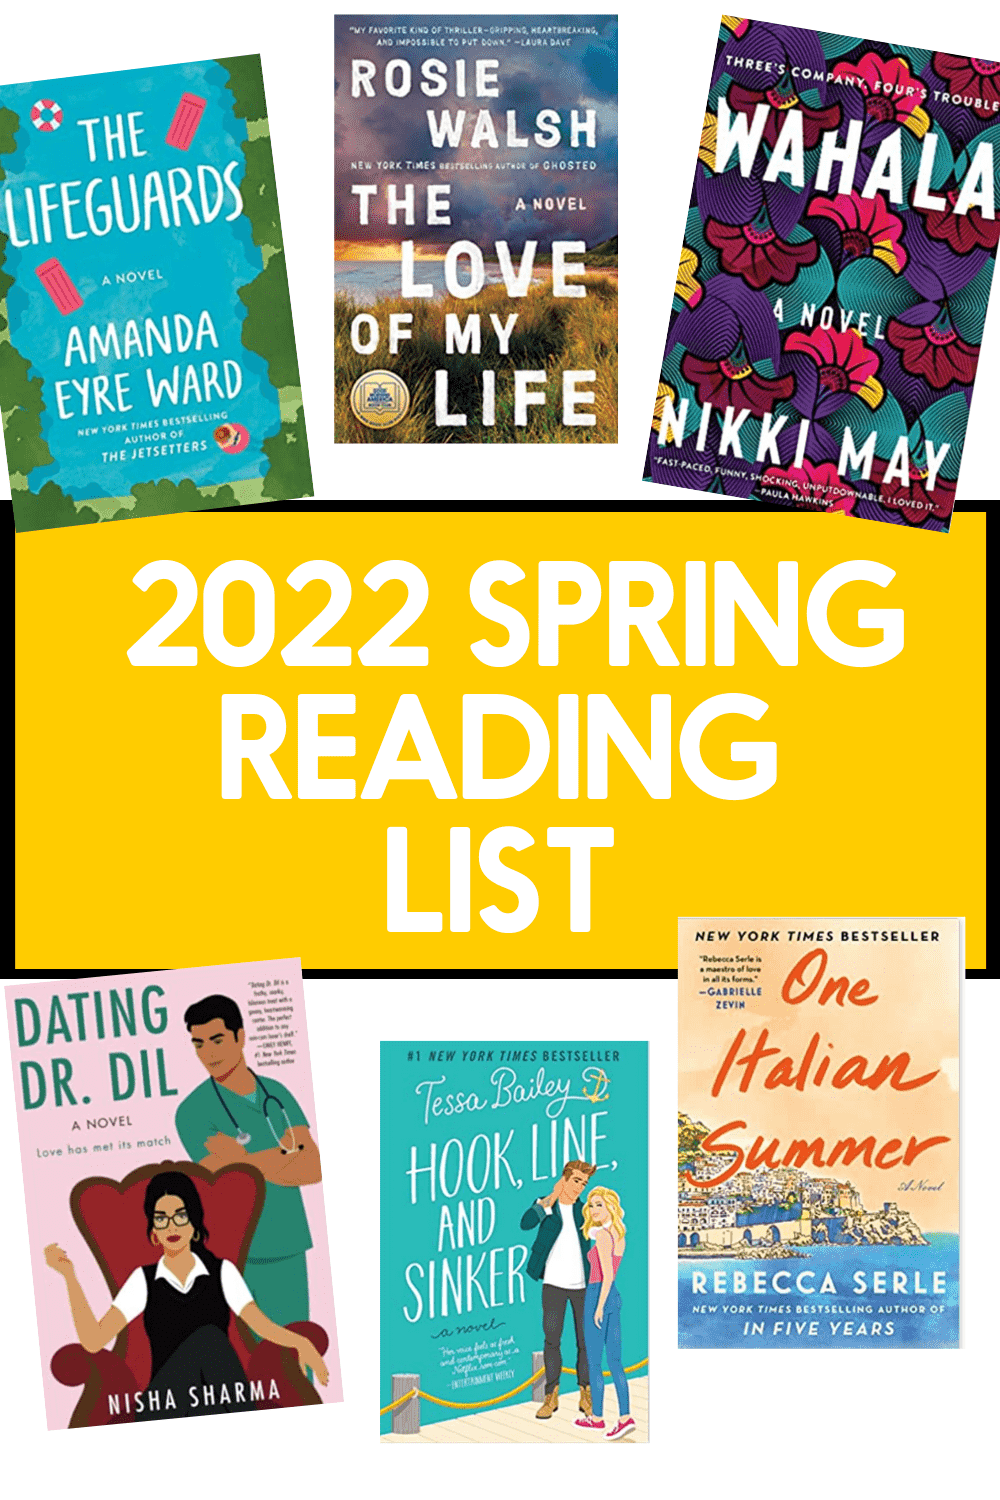 Spring Book Club: Add Some Sunshine With These Books!